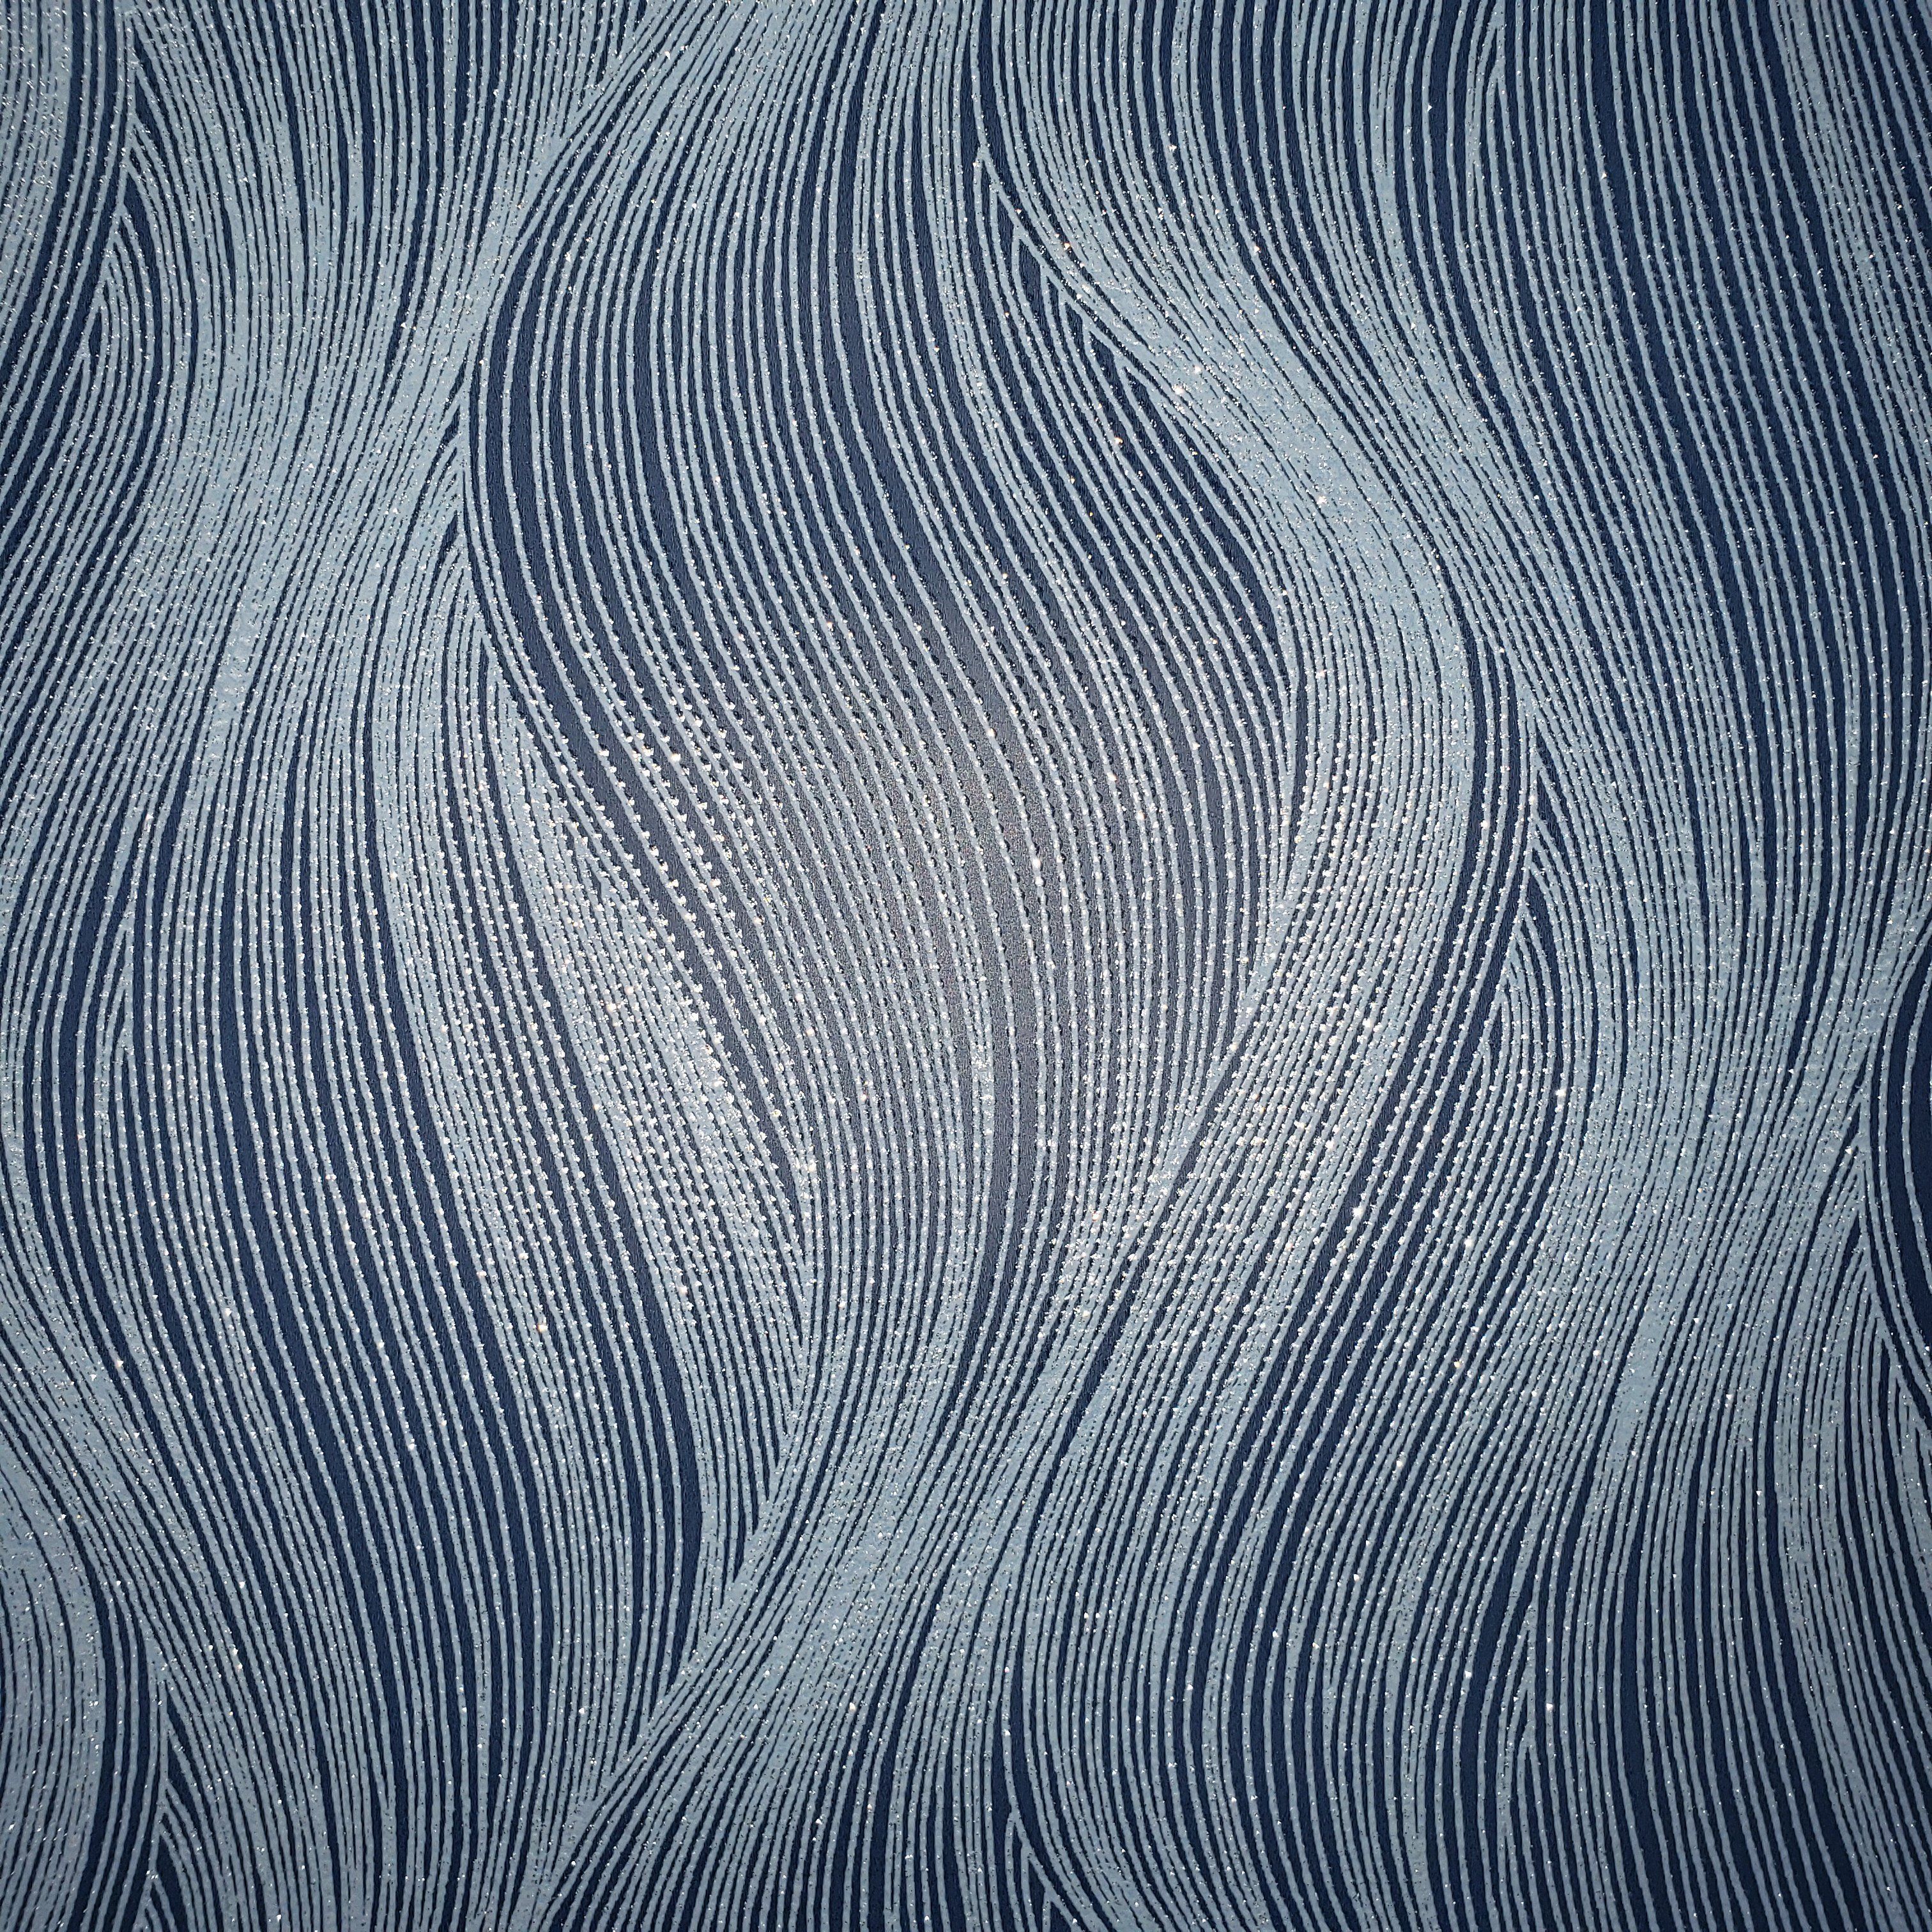 A close up of a blue and white patterned curtain - Silver